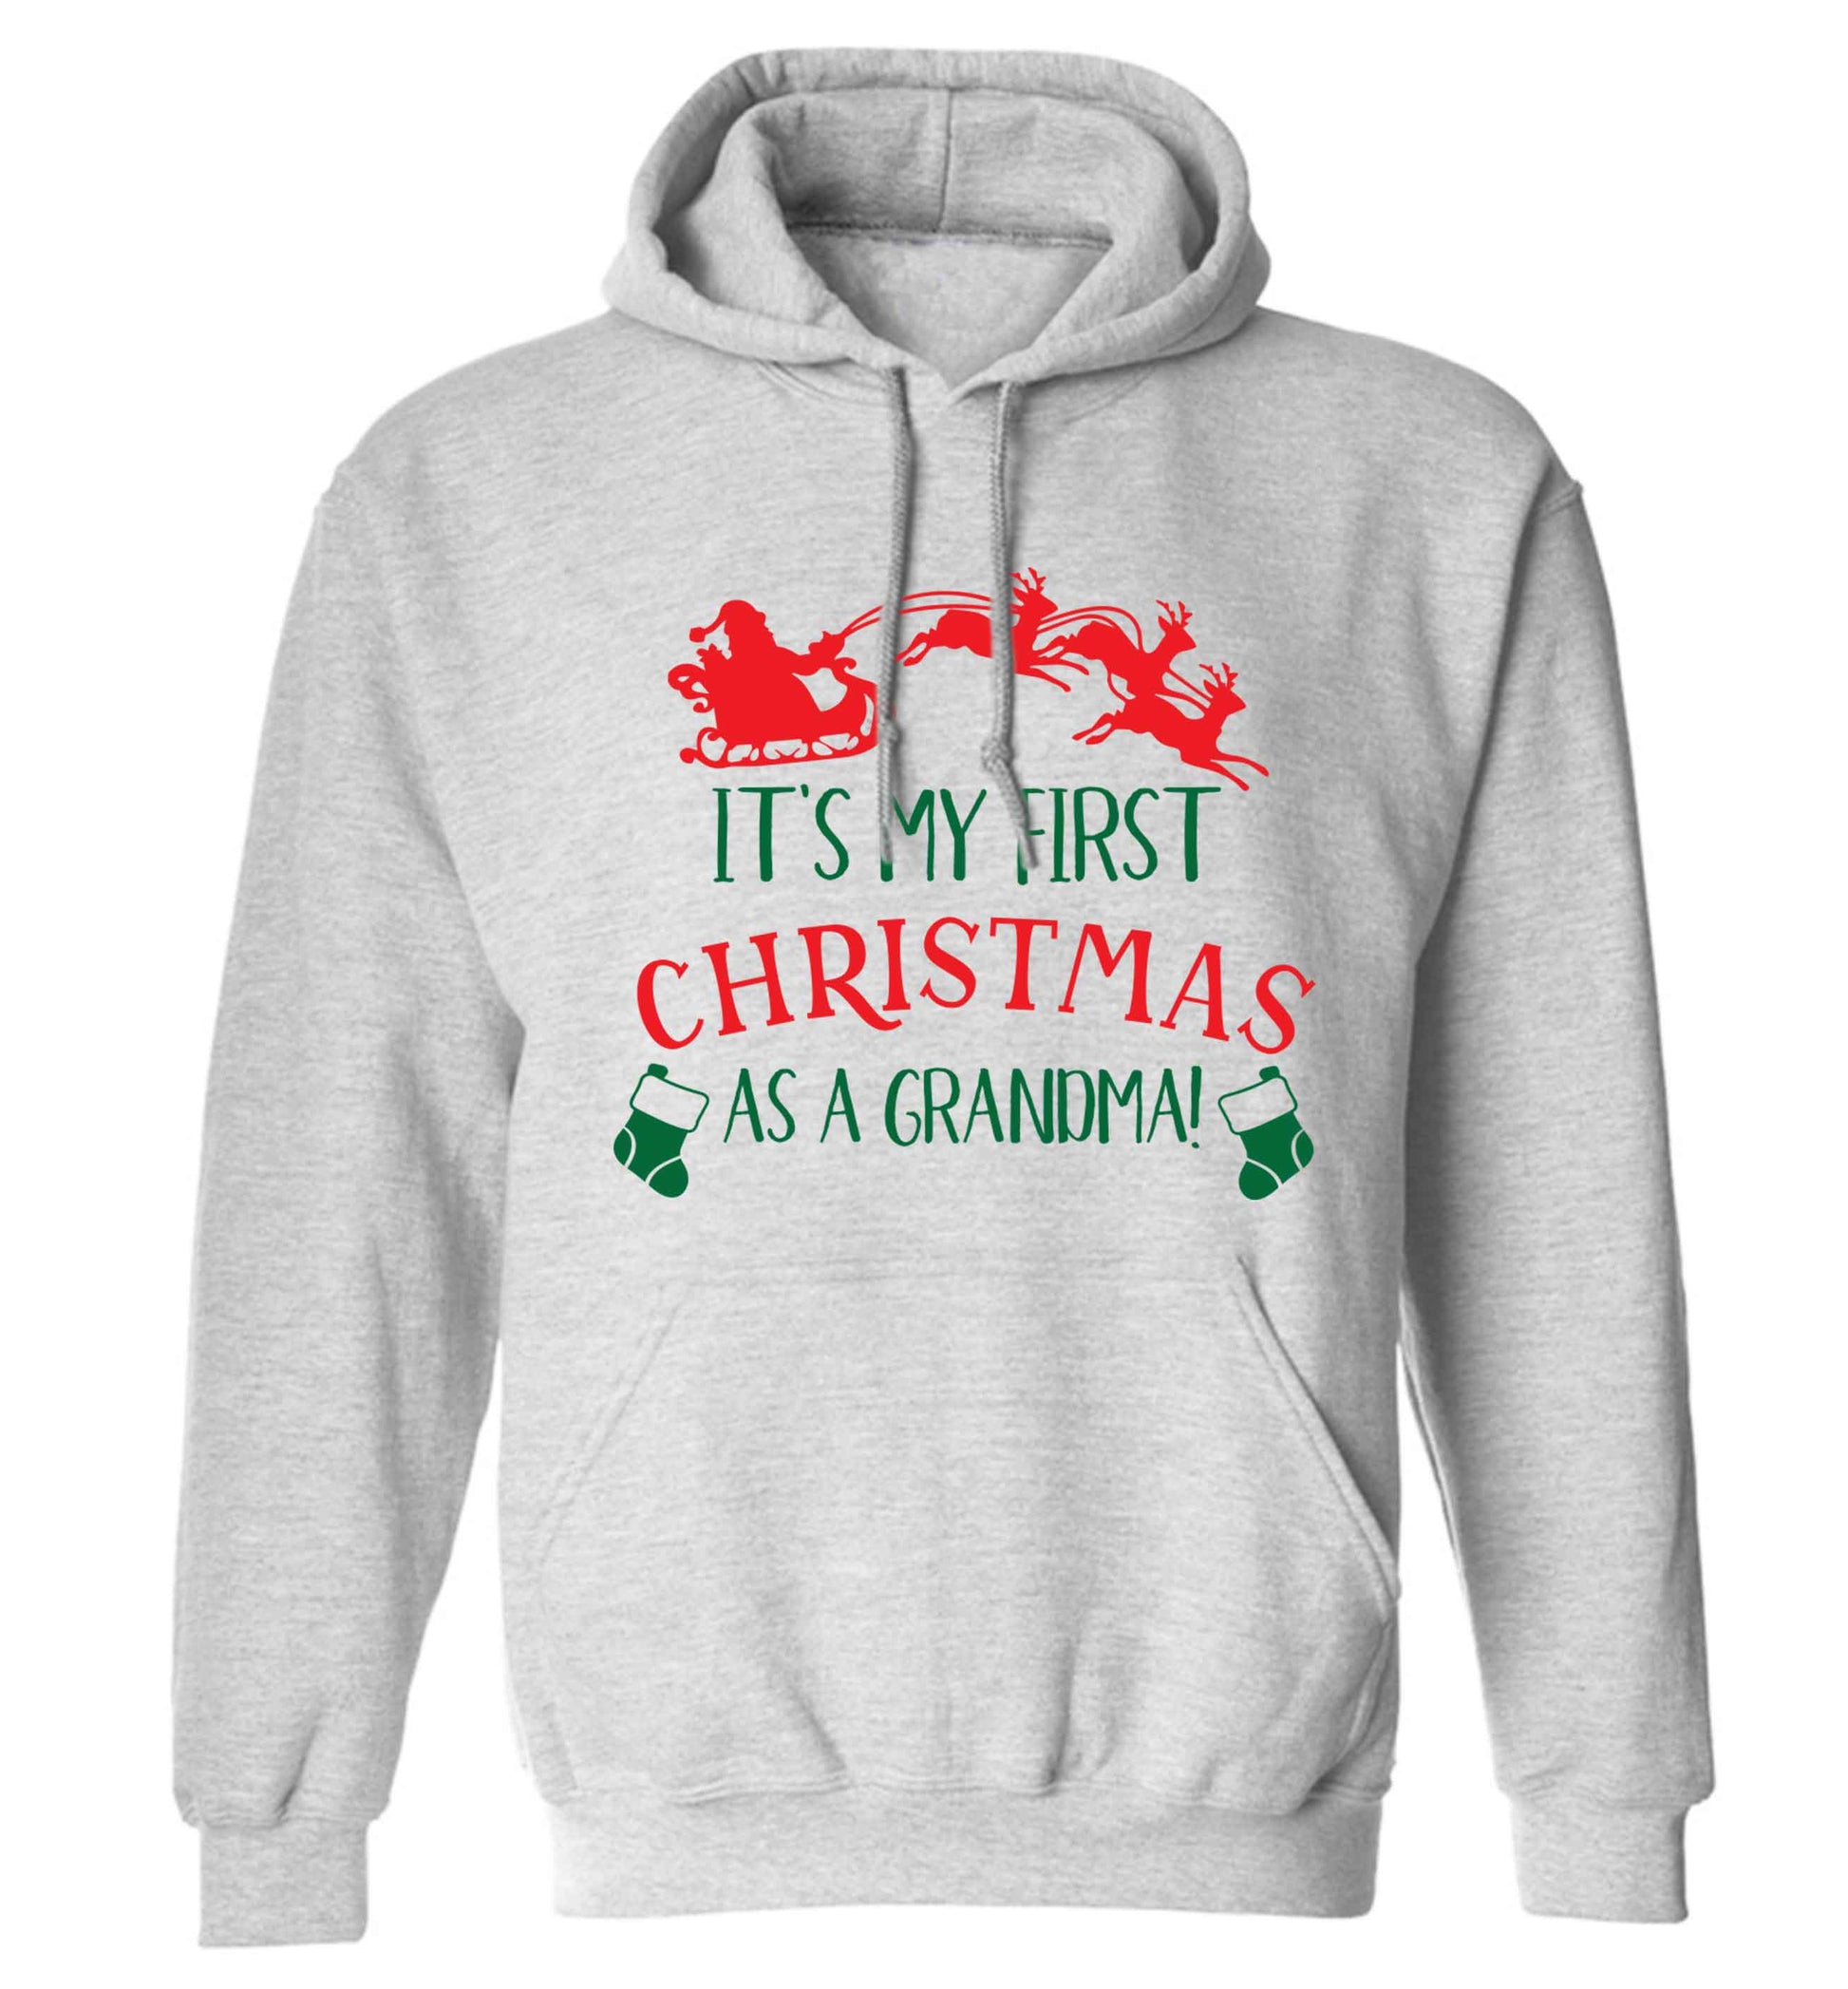 It's my first Christmas as a grandma! adults unisex grey hoodie 2XL